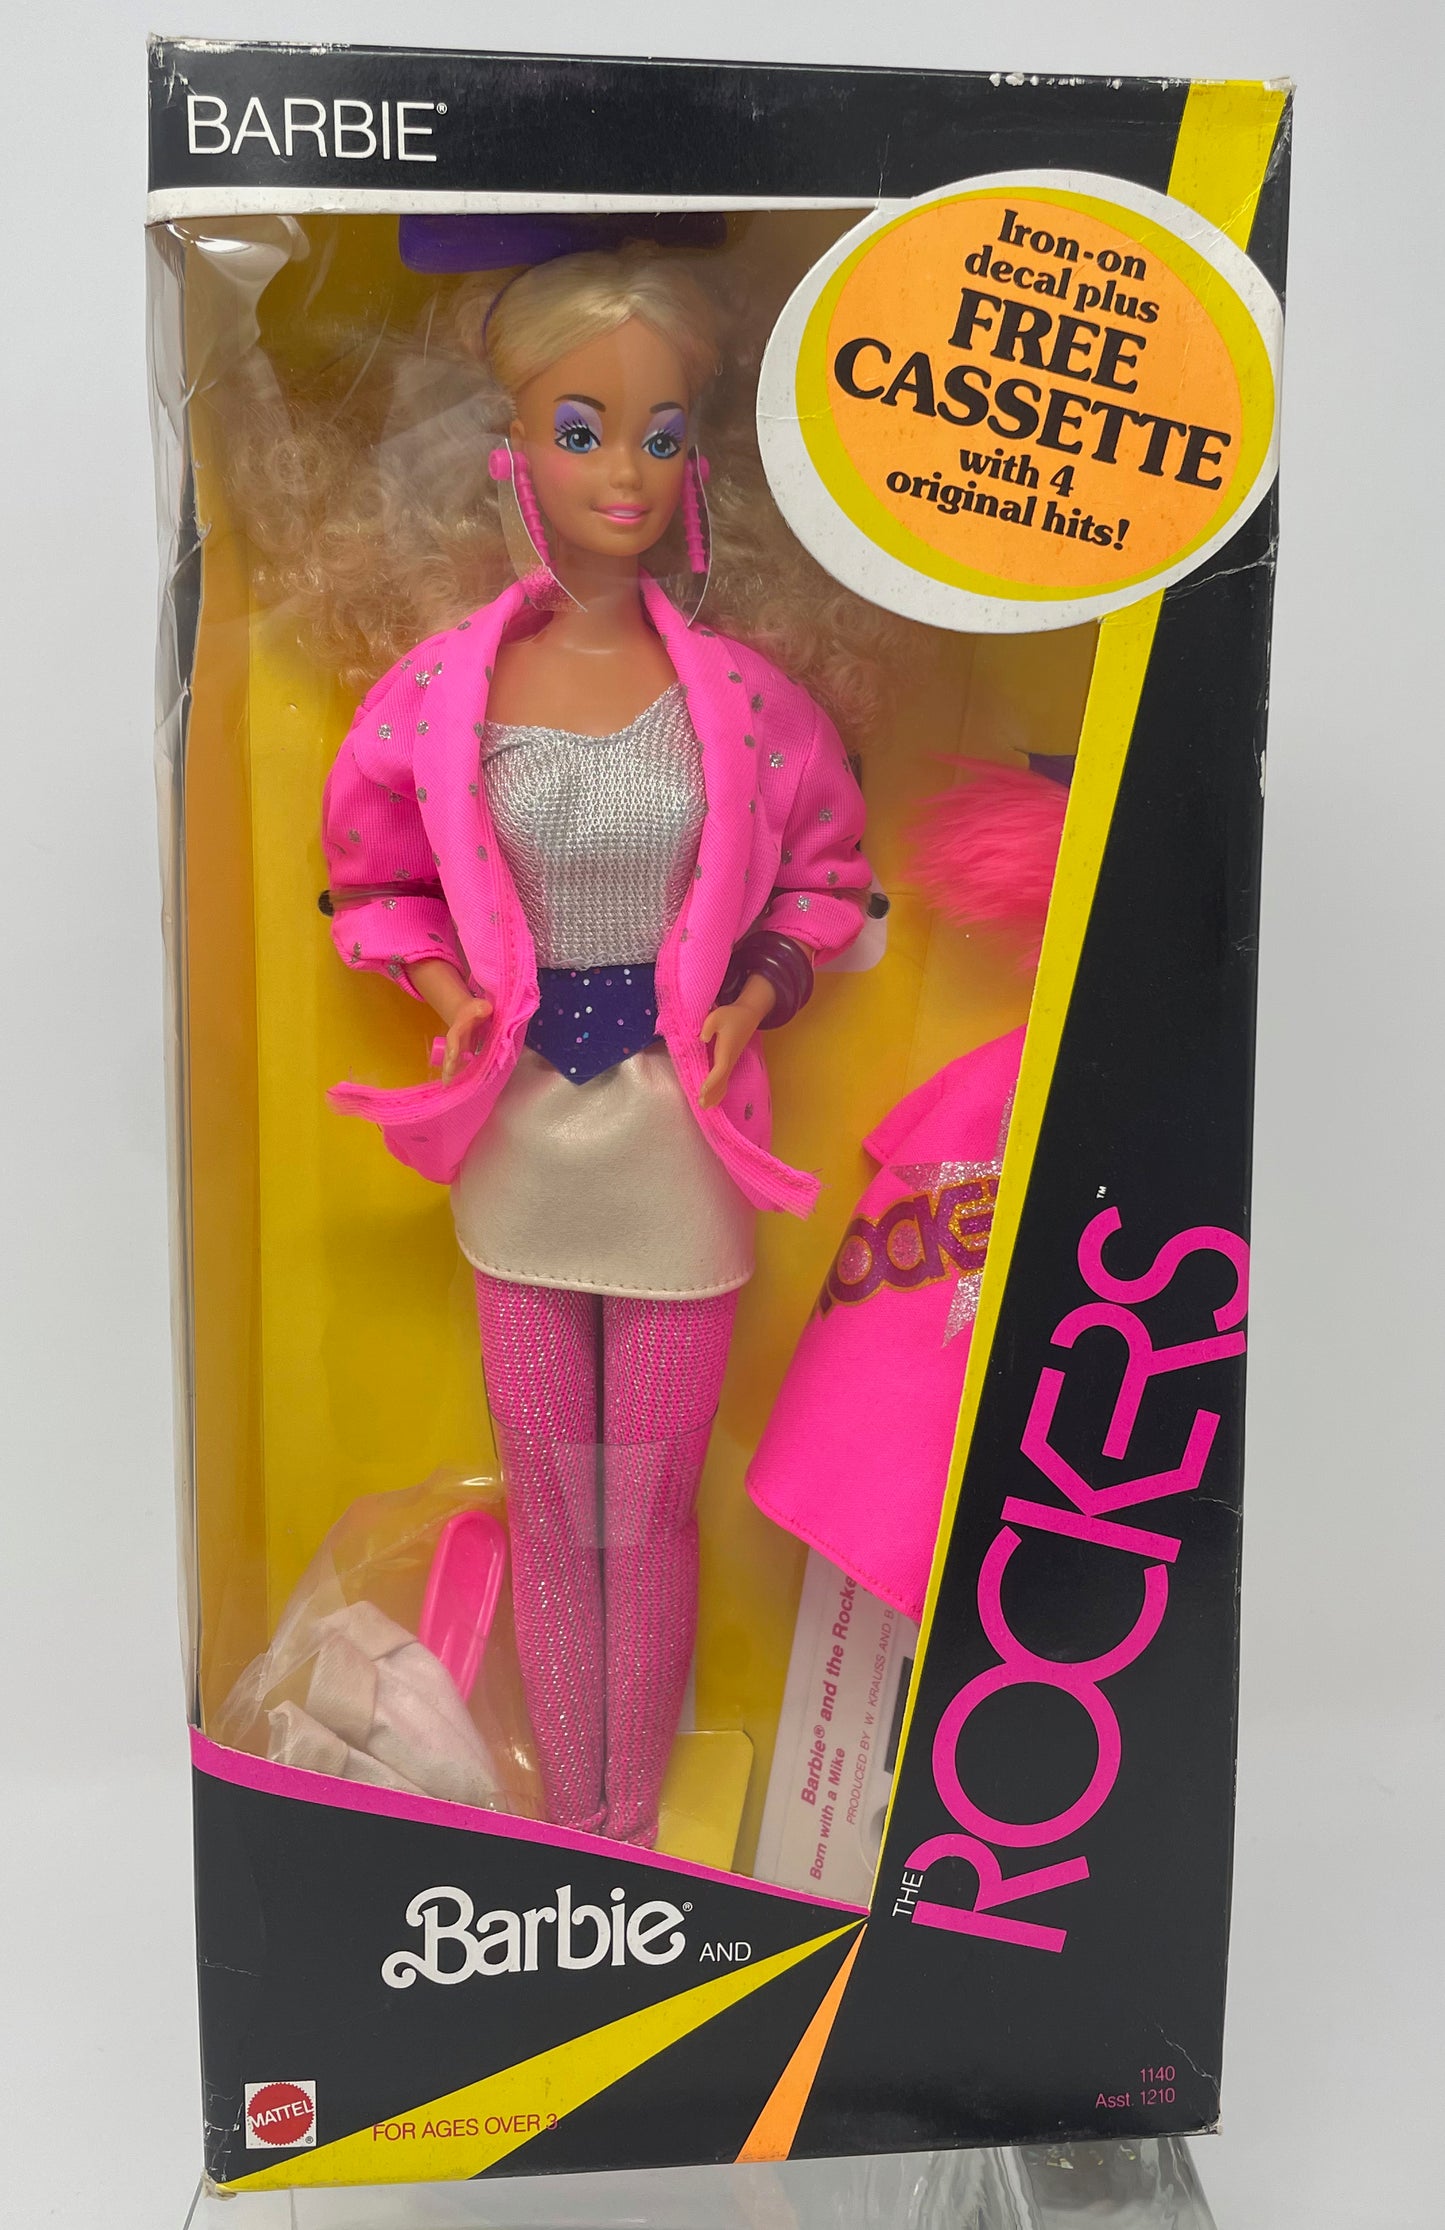 BARBIE AND THE ROCKERS - BARBIE #1140 - MATTEL 1985 (2 OF 2)